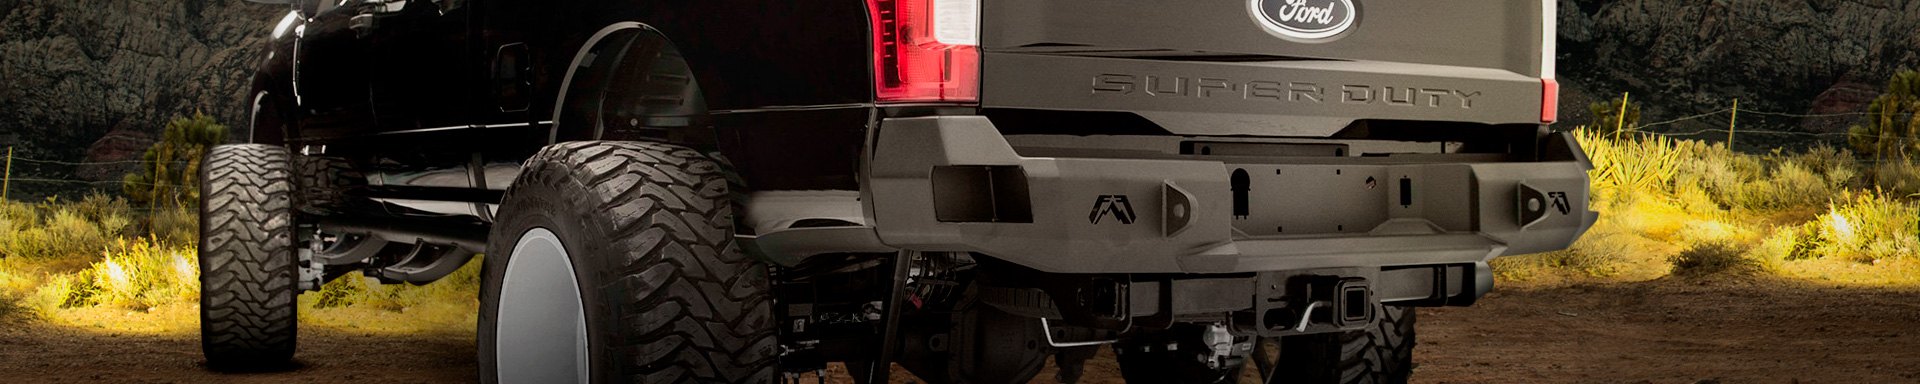 New HD Rear Bumpers For Ford Super Duty Trucks